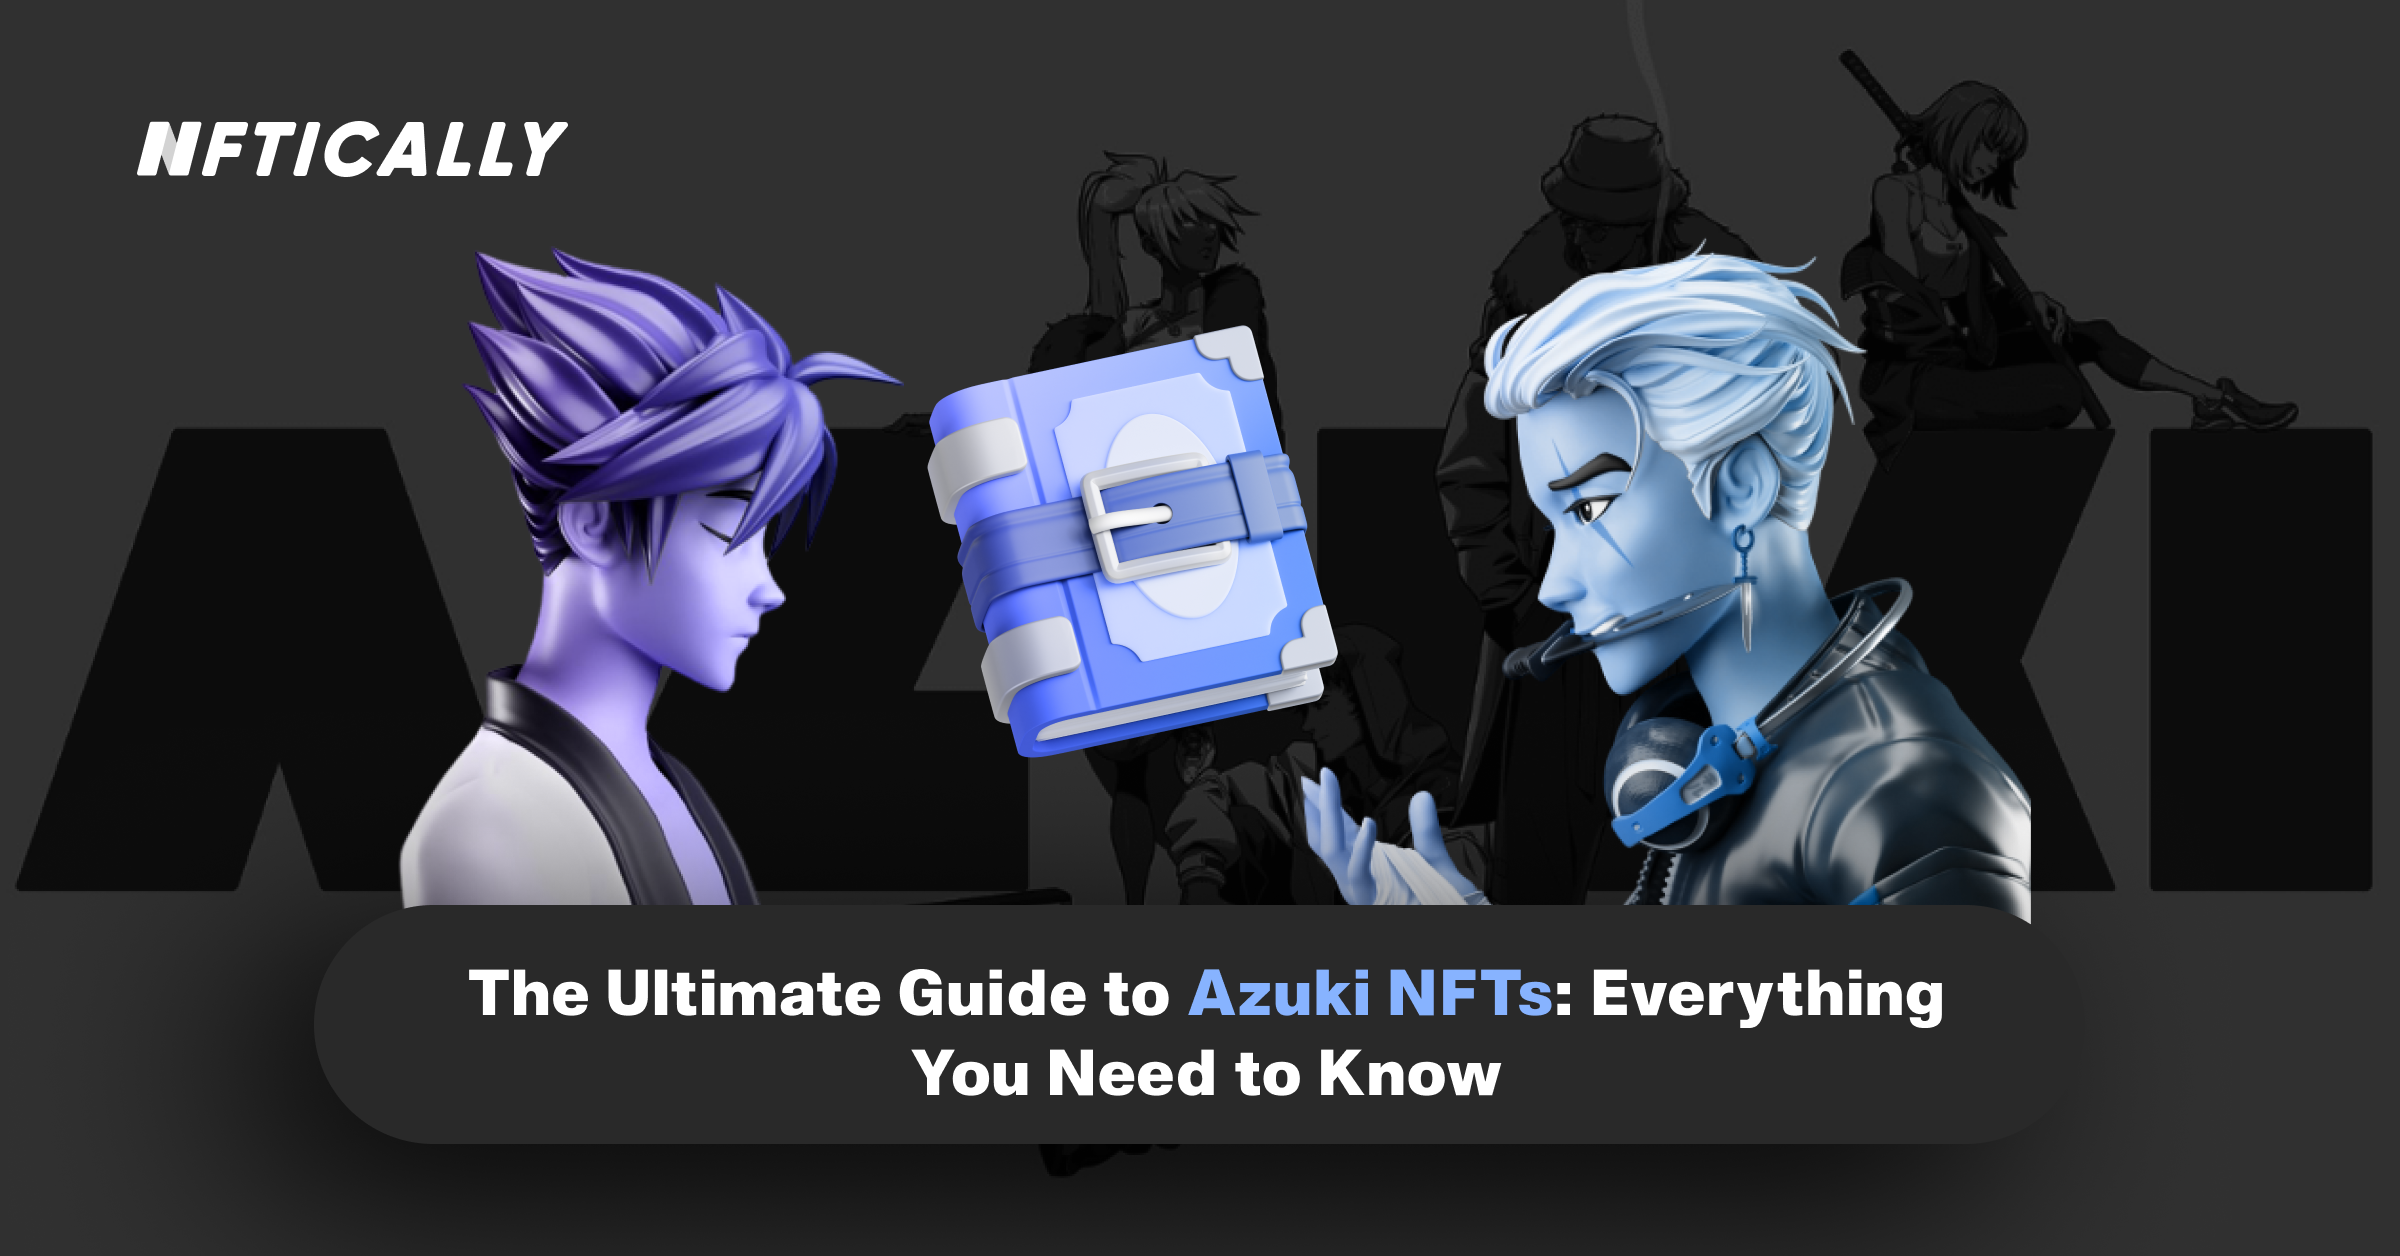 The Ultimate Guide to Azuki NFTs: Everything You Need to Know